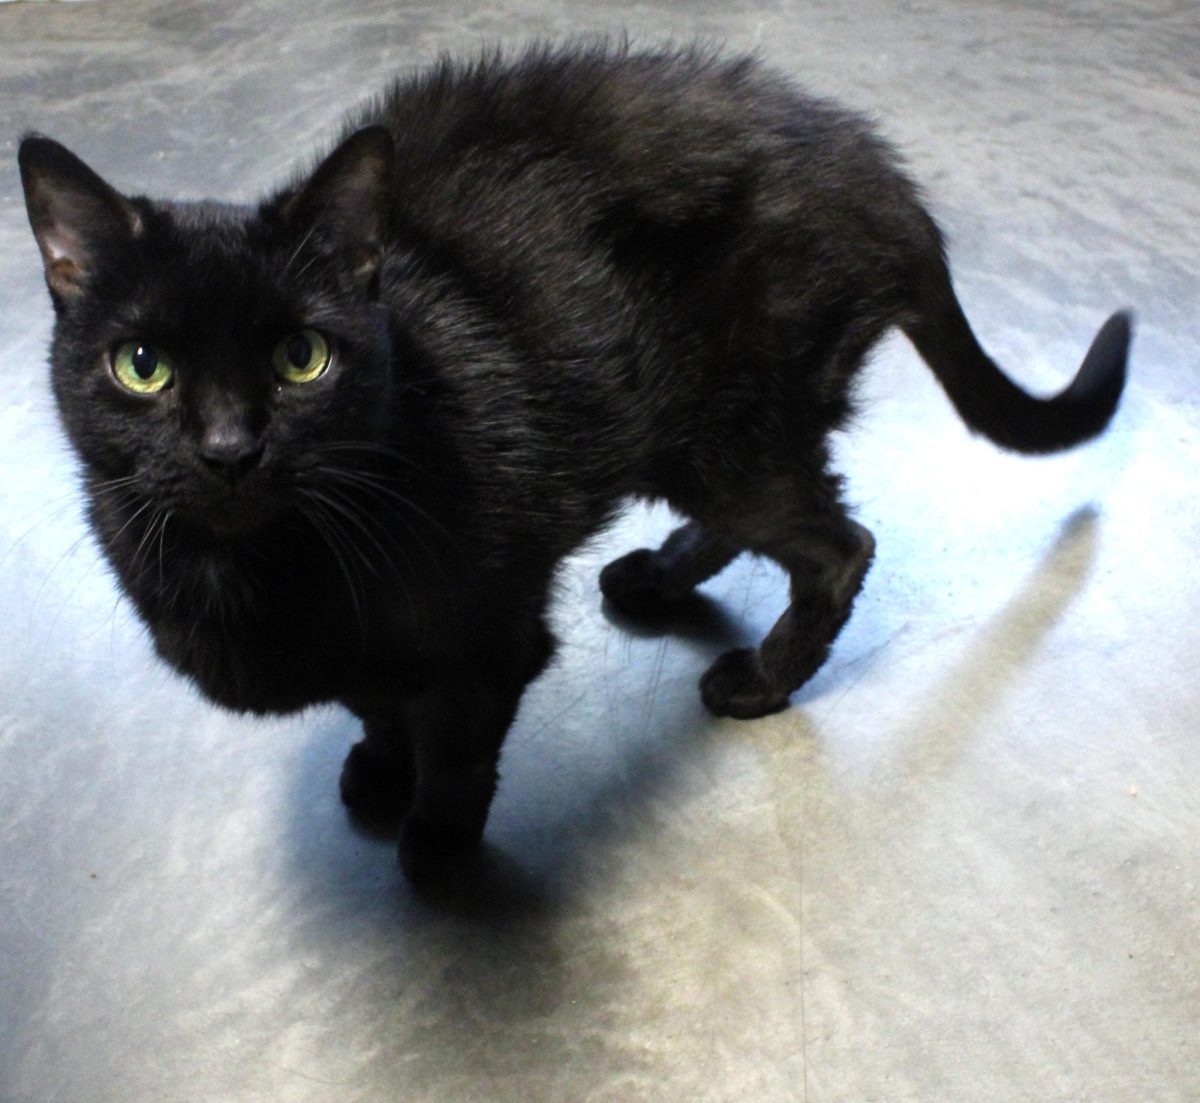 Aaron from accounting, a black cat, looks around the cat play area with a curious face at Tails Humane Society, 2250 Barber Greene Road. At this time, Aaron from accounting has been adopted into his forever home. (Nyla Owens | Northern Star)